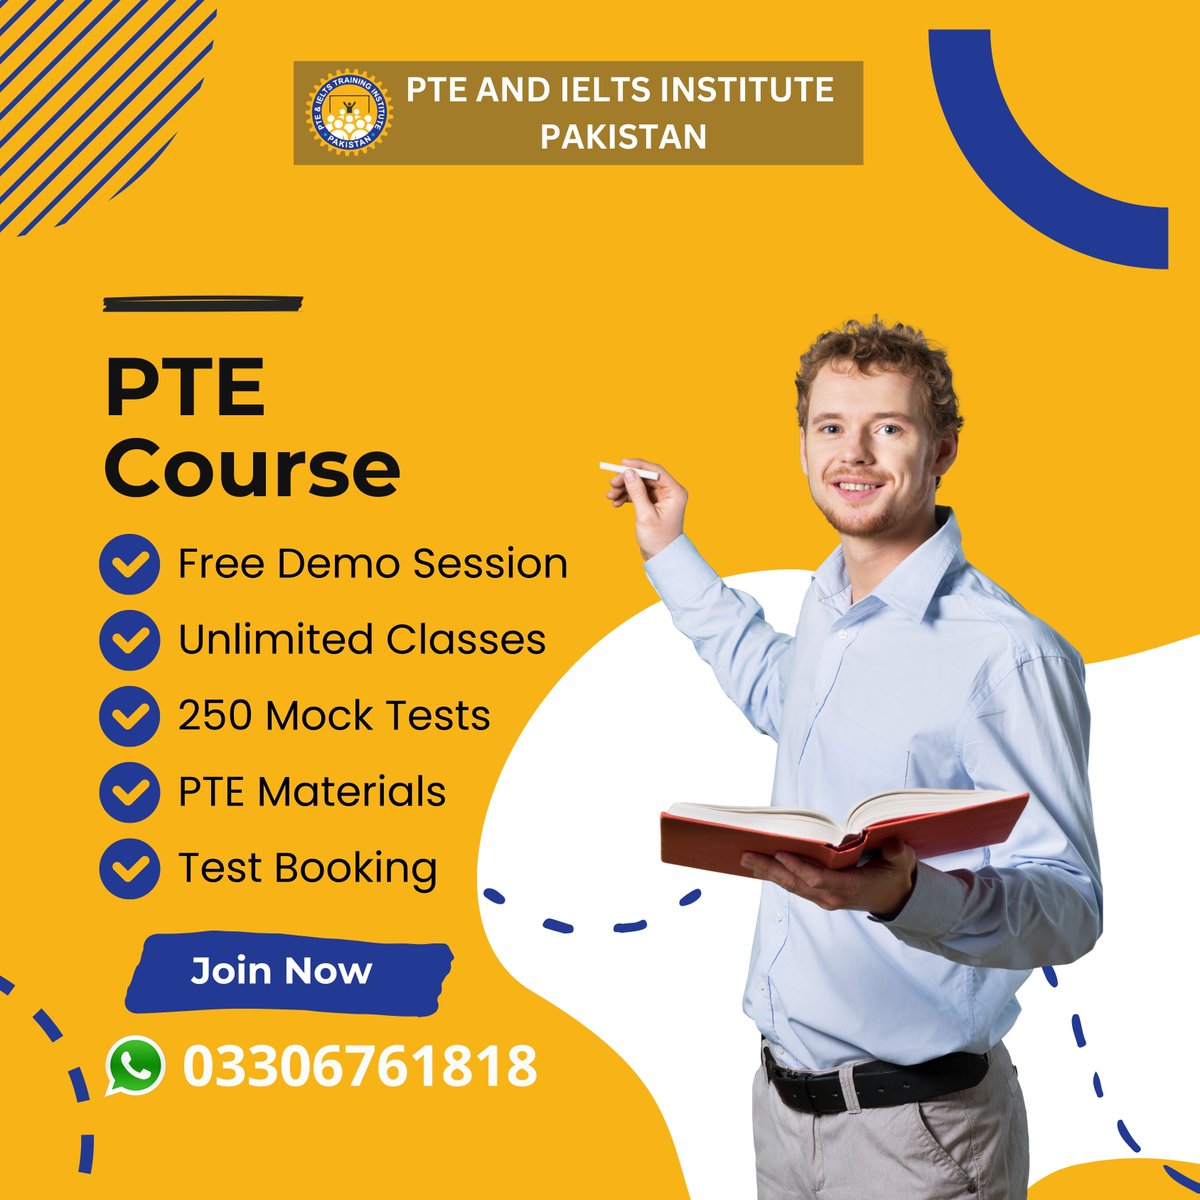 Achieve your PTE goal score with PAIIP! 
#paiip #PAIIP #paiipisl #pte #PearsonTestofEnglish #ptespeaking #ptescroes #canada #Australia  #pteukvi #pteacdamic #pteforstudy #StudyAbroad #studyabroad